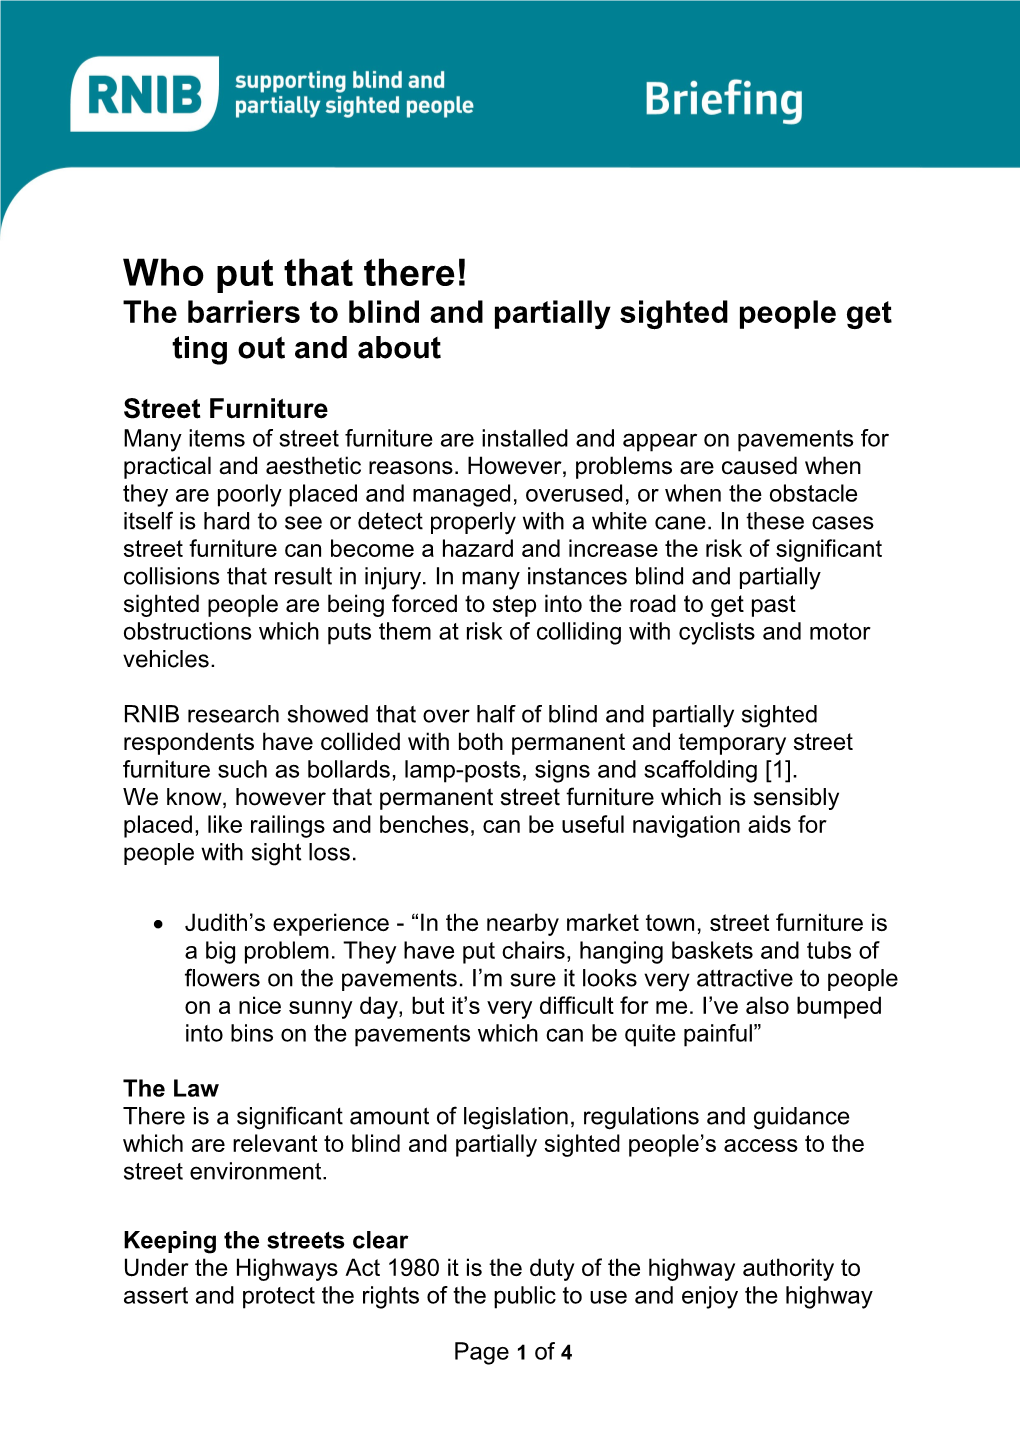 The Barriers to Blind and Partially Sighted People Getting out and About